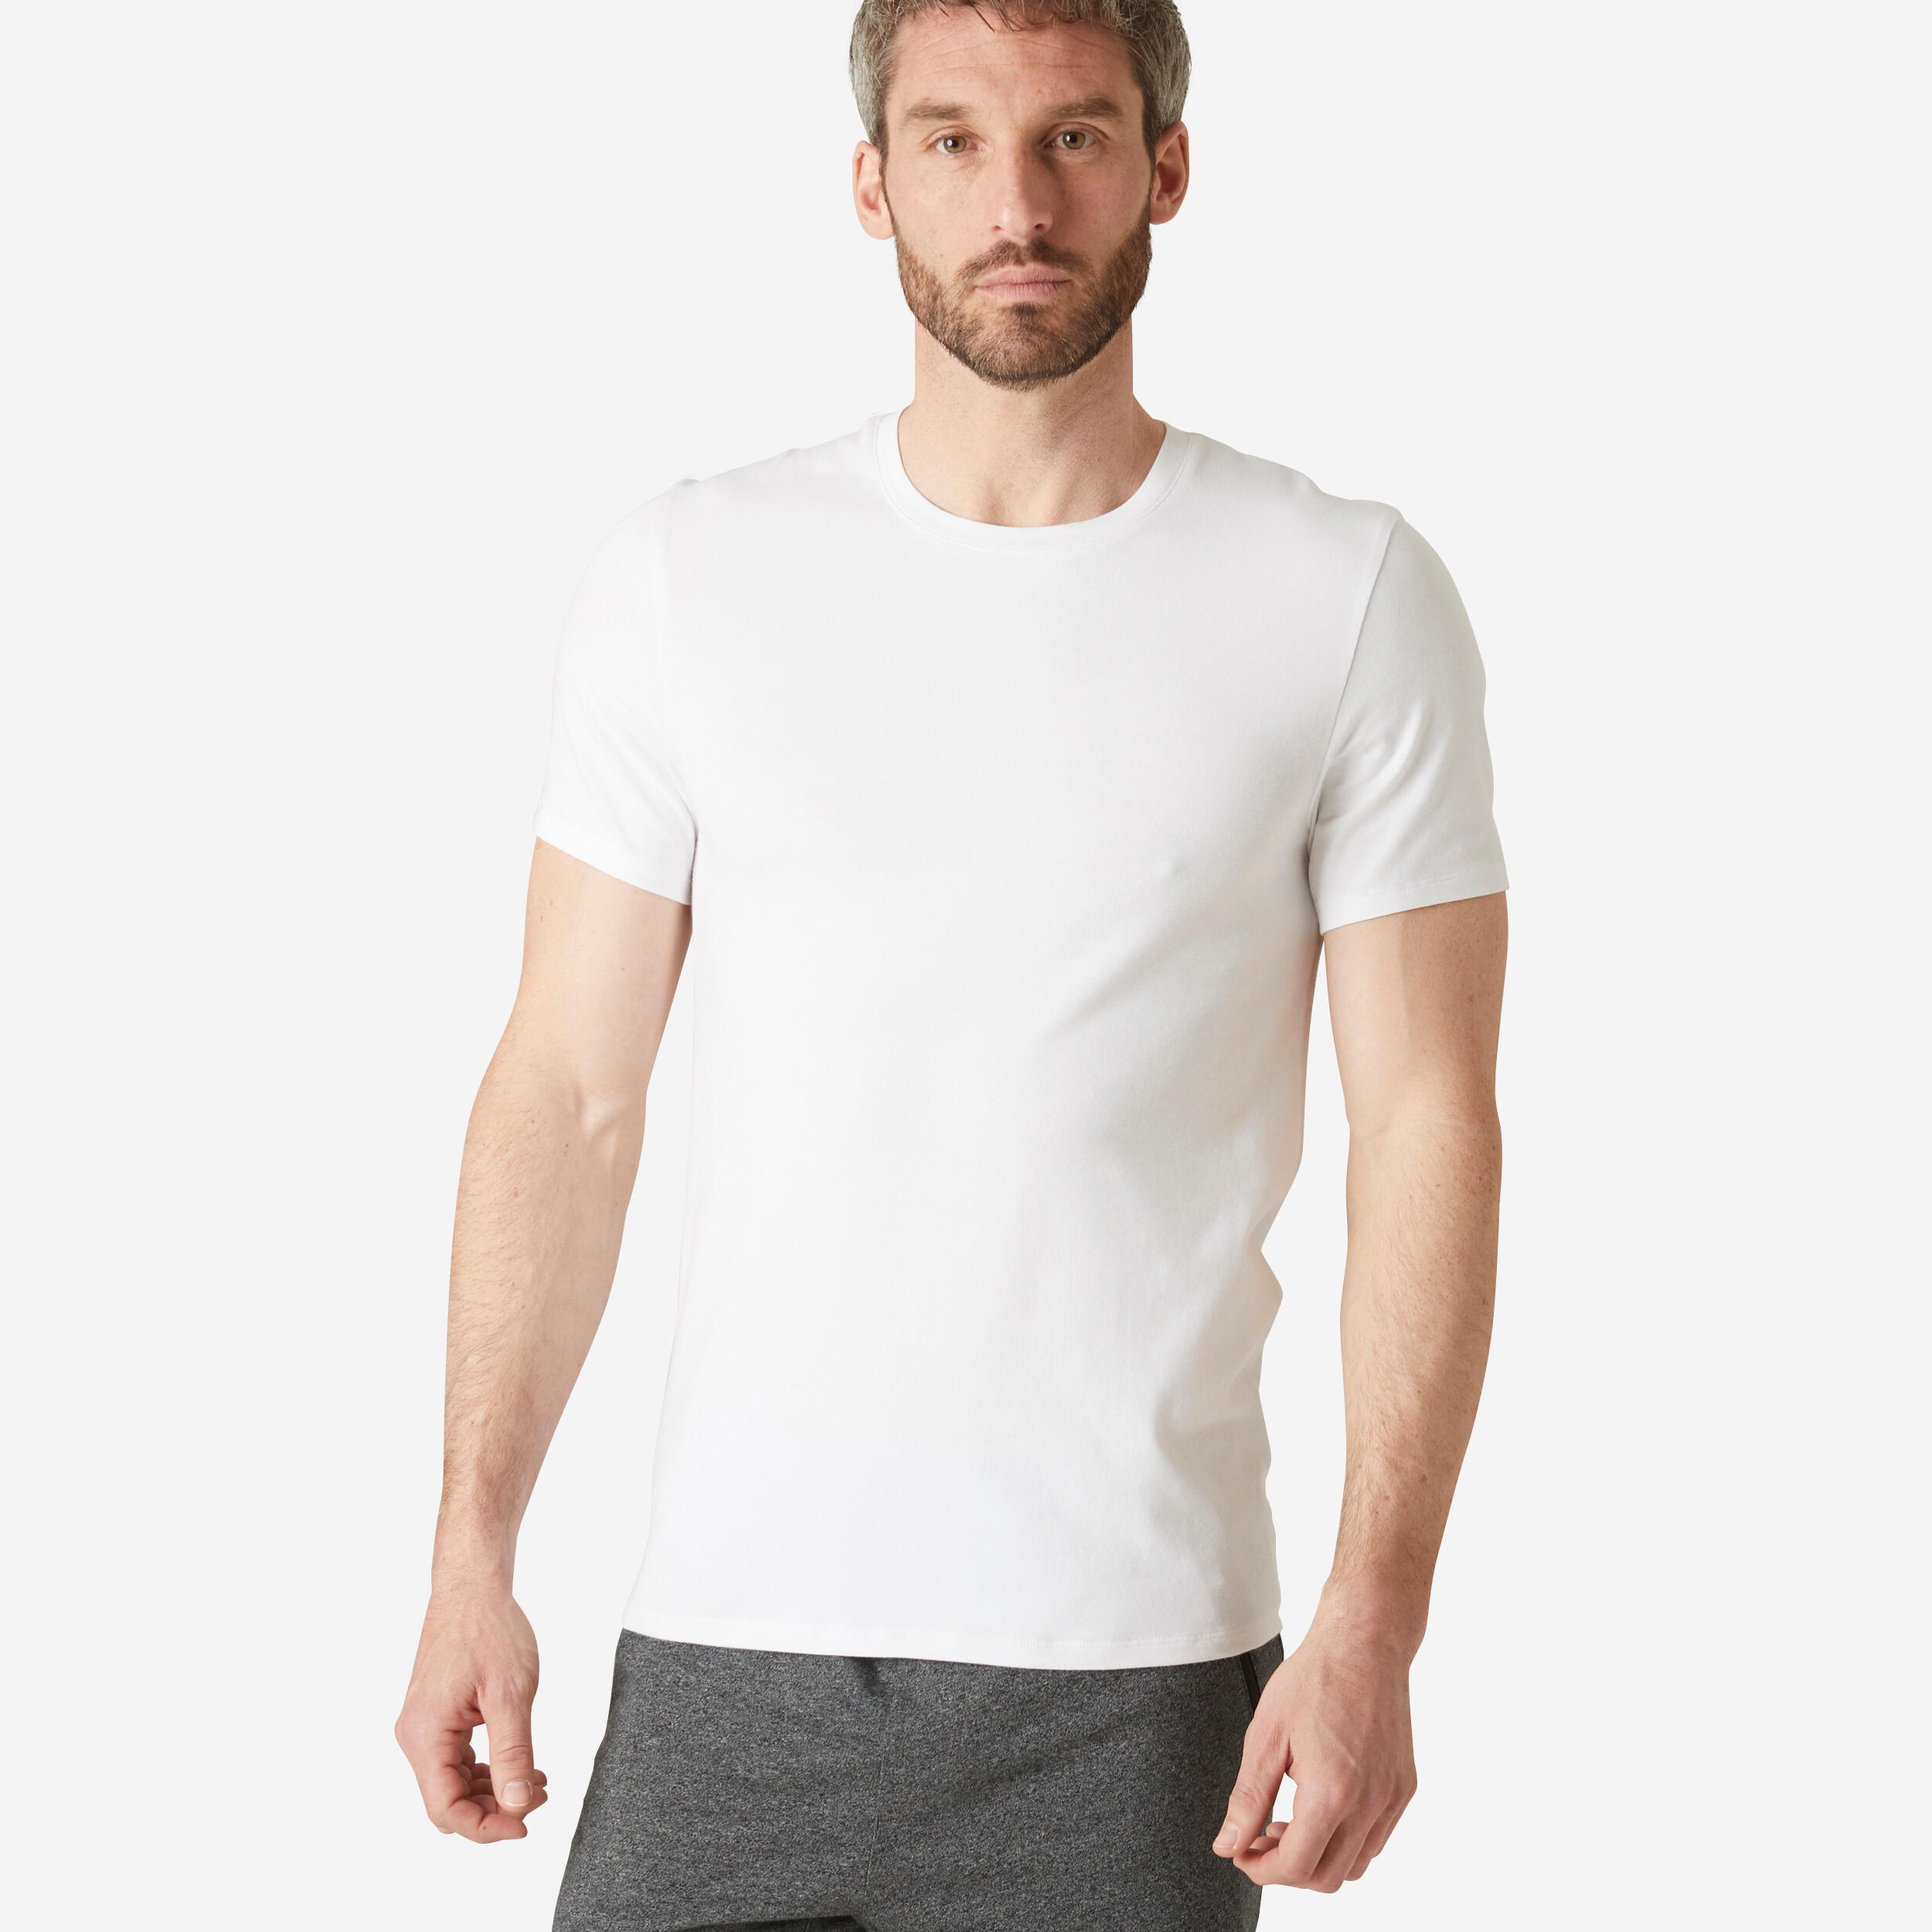 DOMYOS Second Life - Men's Slim-Fit Fitness T-Shirt 500 - Ice White - GOOD